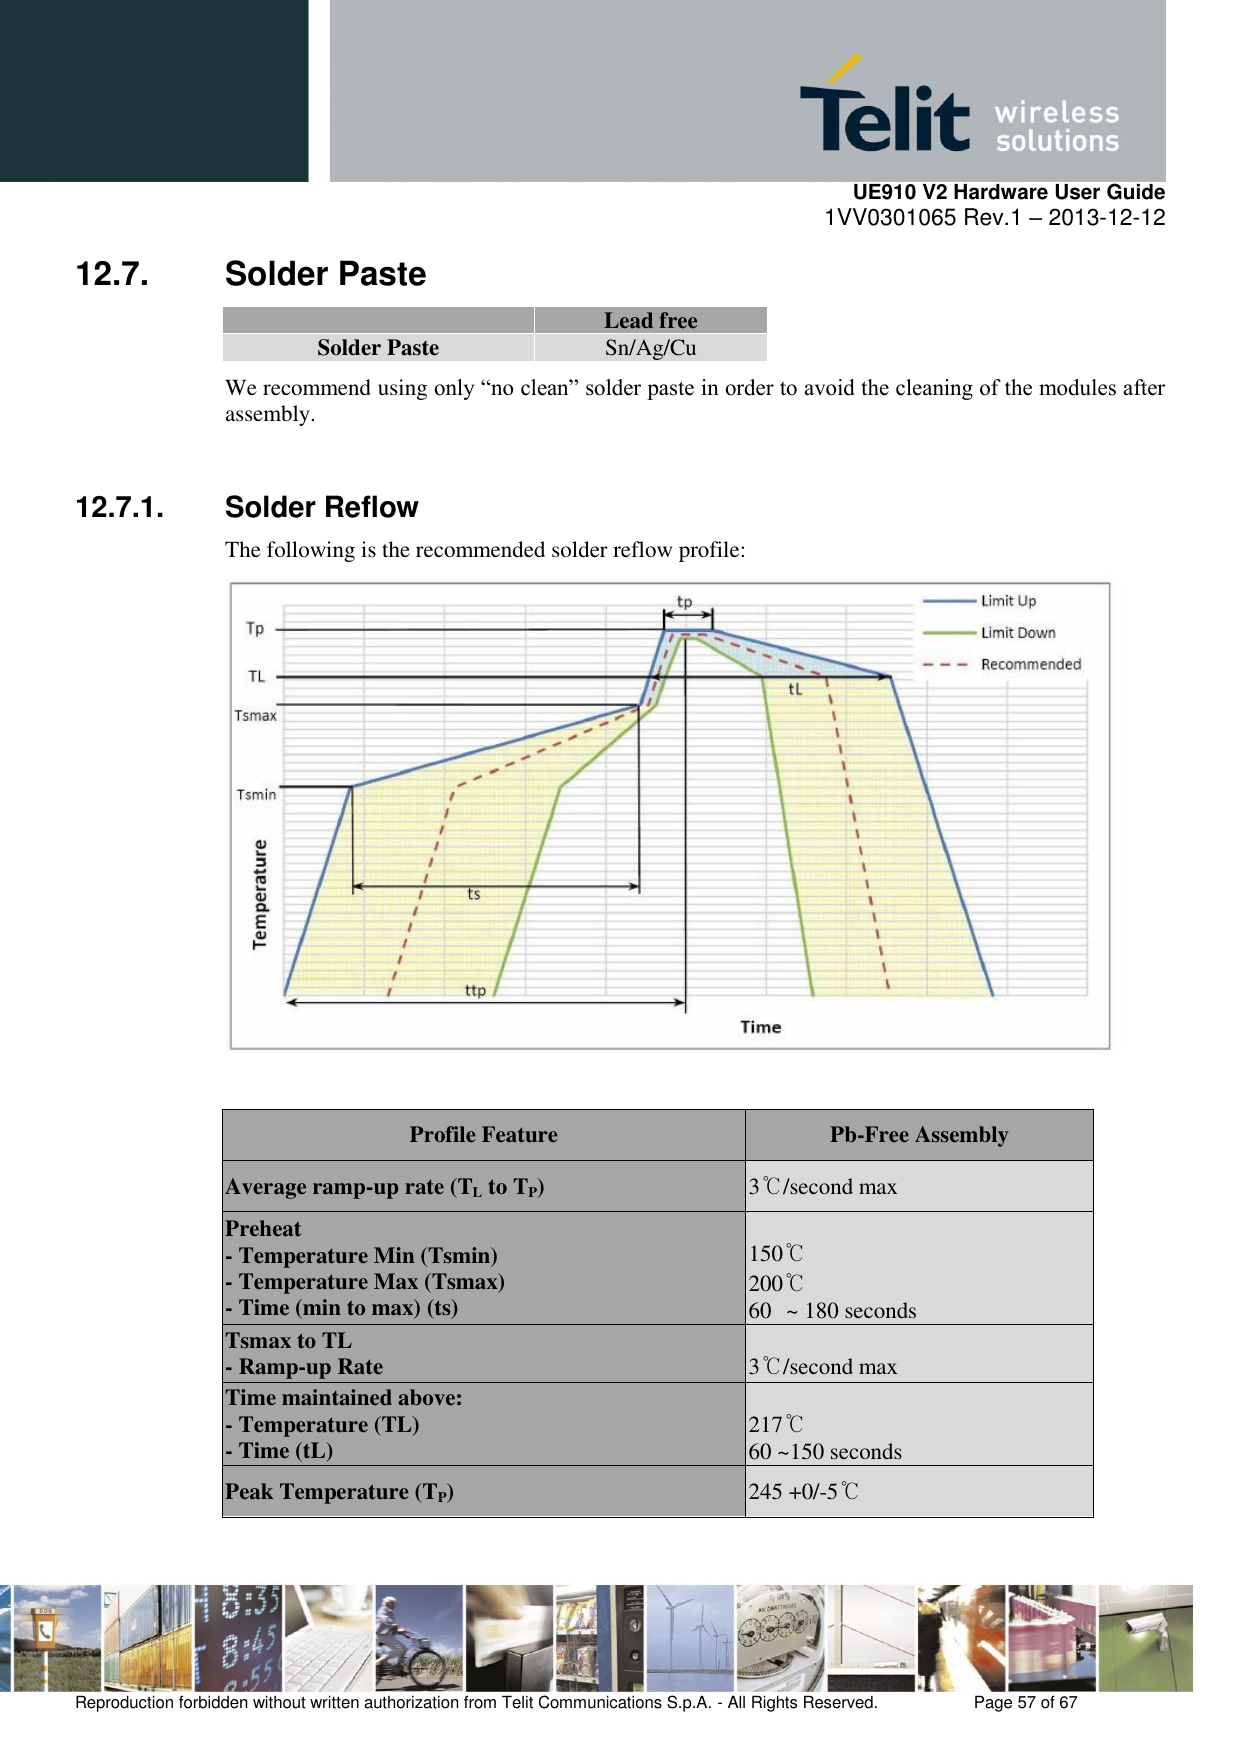     UE910 V2 Hardware User Guide 1VV0301065 Rev.1 – 2013-12-12  Reproduction forbidden without written authorization from Telit Communications S.p.A. - All Rights Reserved.    Page 57 of 67                                                     12.7.  Solder Paste  Lead free Solder Paste Sn/Ag/Cu We recommend using only “no clean” solder paste in order to avoid the cleaning of the modules after assembly.  12.7.1.  Solder Reflow The following is the recommended solder reflow profile:   Profile Feature Pb-Free Assembly Average ramp-up rate (TL to TP) 3℃/second max Preheat - Temperature Min (Tsmin) - Temperature Max (Tsmax) - Time (min to max) (ts)  150℃ 200℃ 60 ~ 180 seconds Tsmax to TL - Ramp-up Rate  3℃/second max Time maintained above: - Temperature (TL) - Time (tL)  217℃ 60 ~150 seconds Peak Temperature (TP) 245 +0/-5℃ 